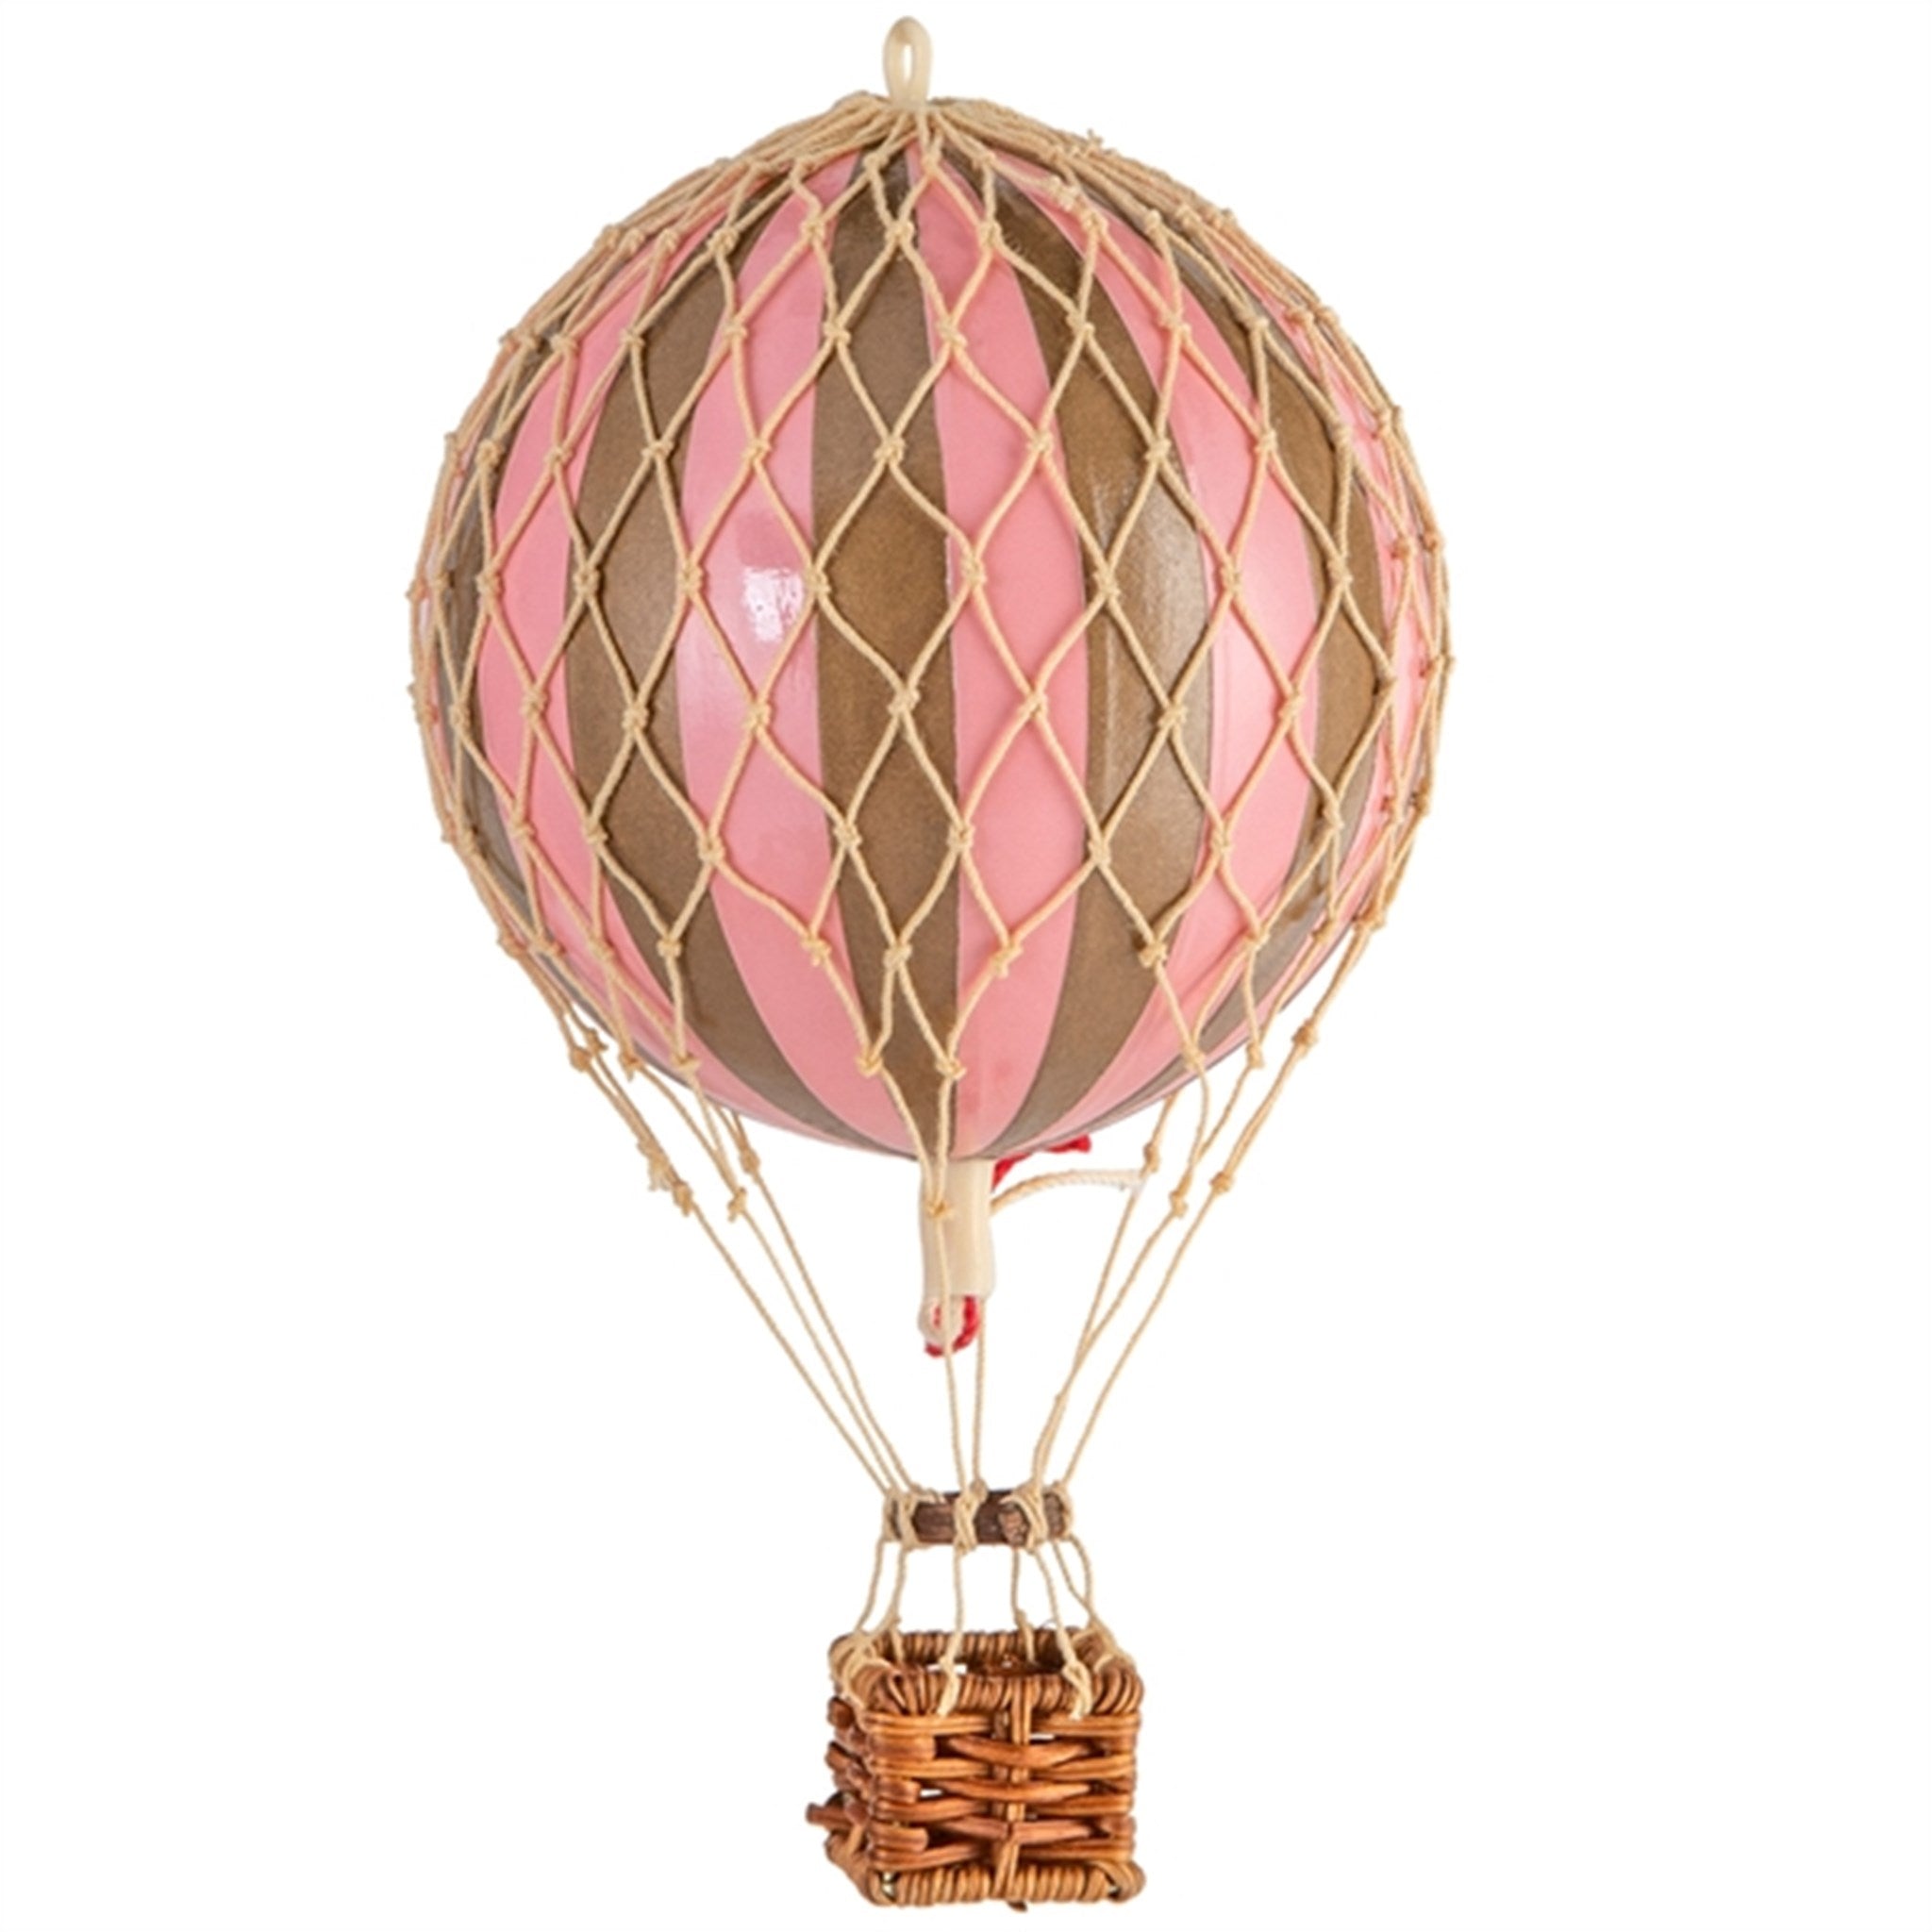 Authentic Models Balloon Gold/Pink 8,5 cm